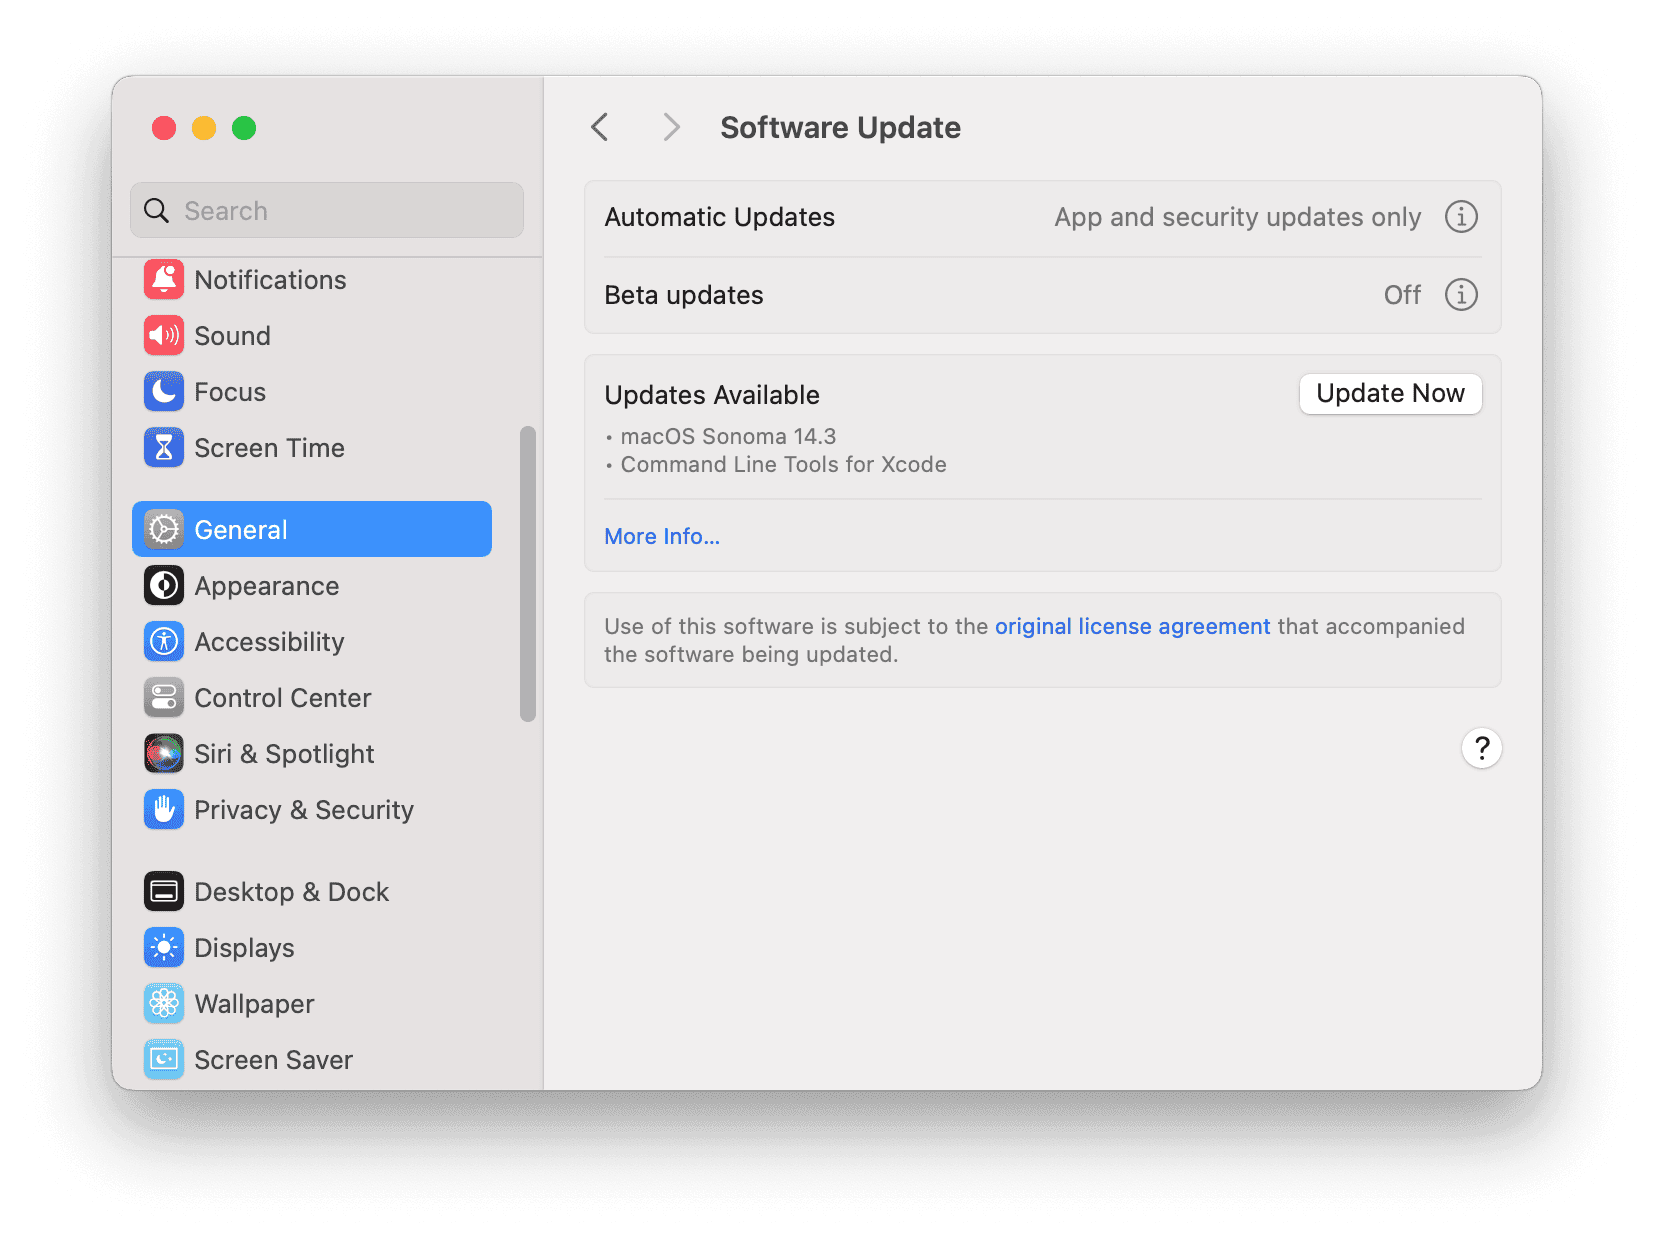 Check Software Update on Mac